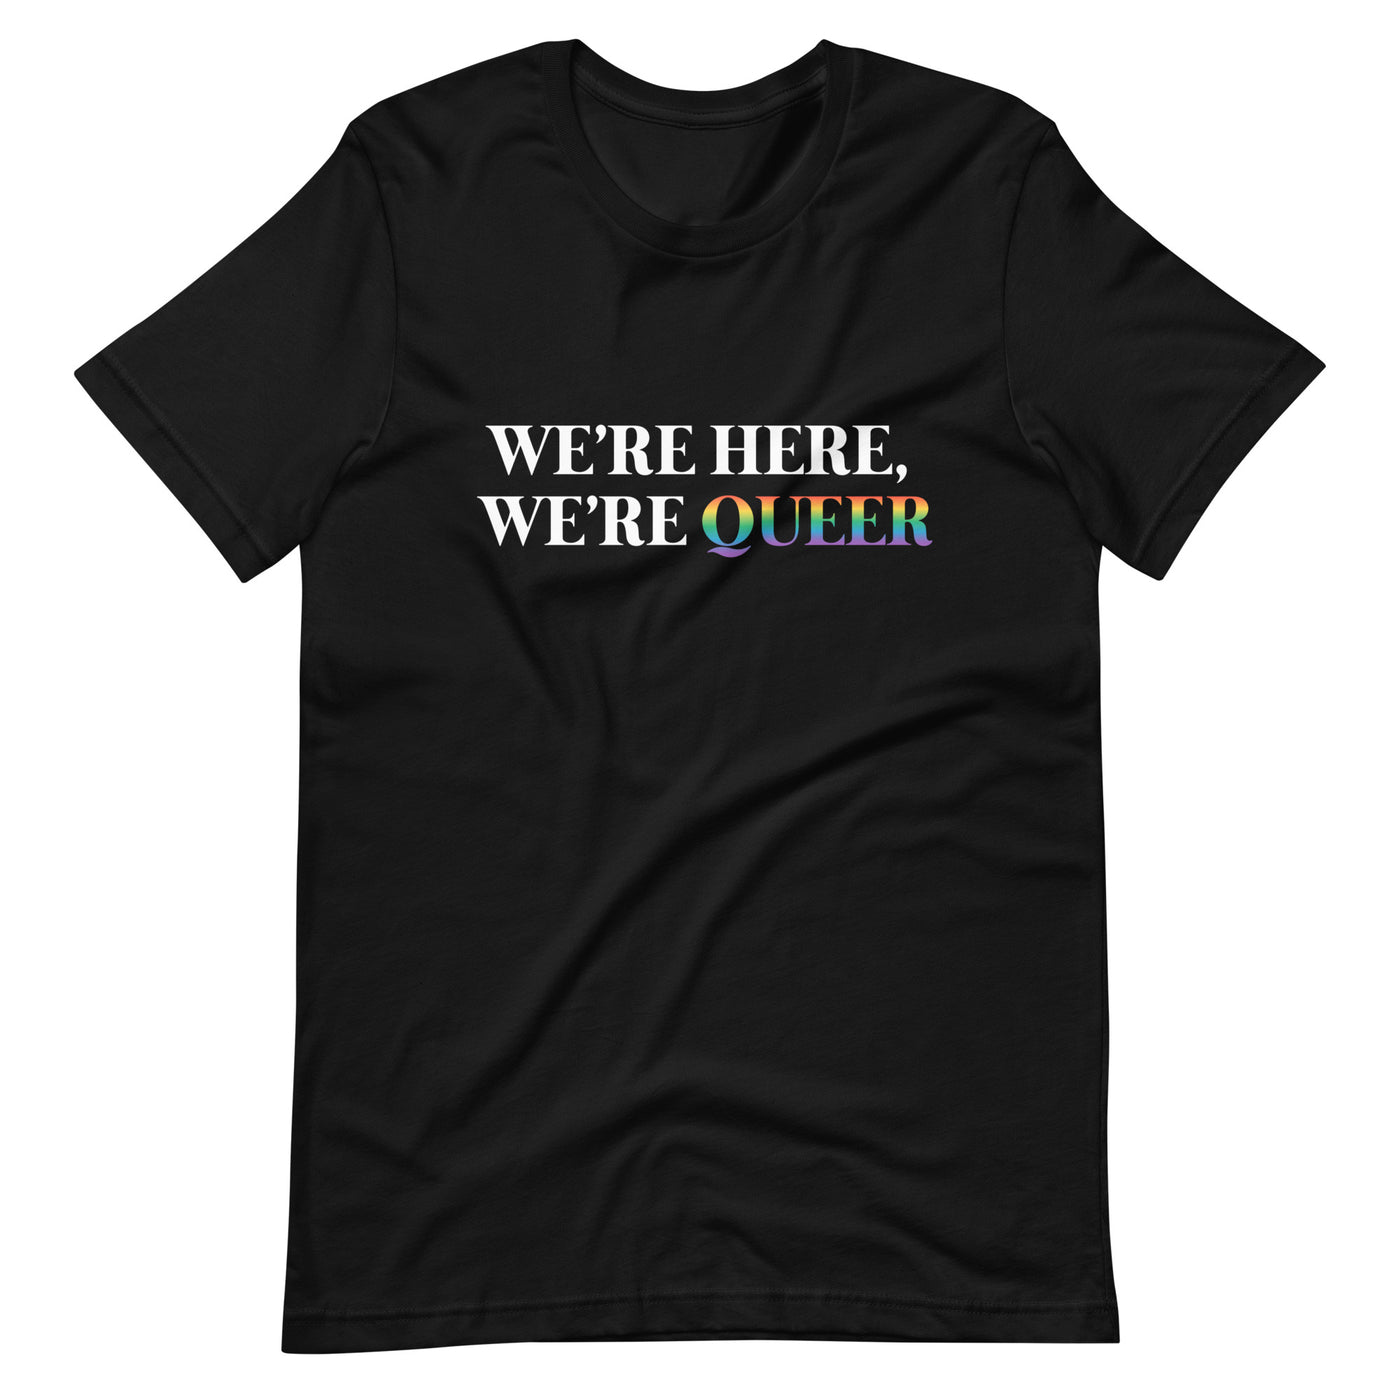 Pride Clothes - Step Out & Step Up We’re Here, We’re Queer Pride T-Shirt - Black